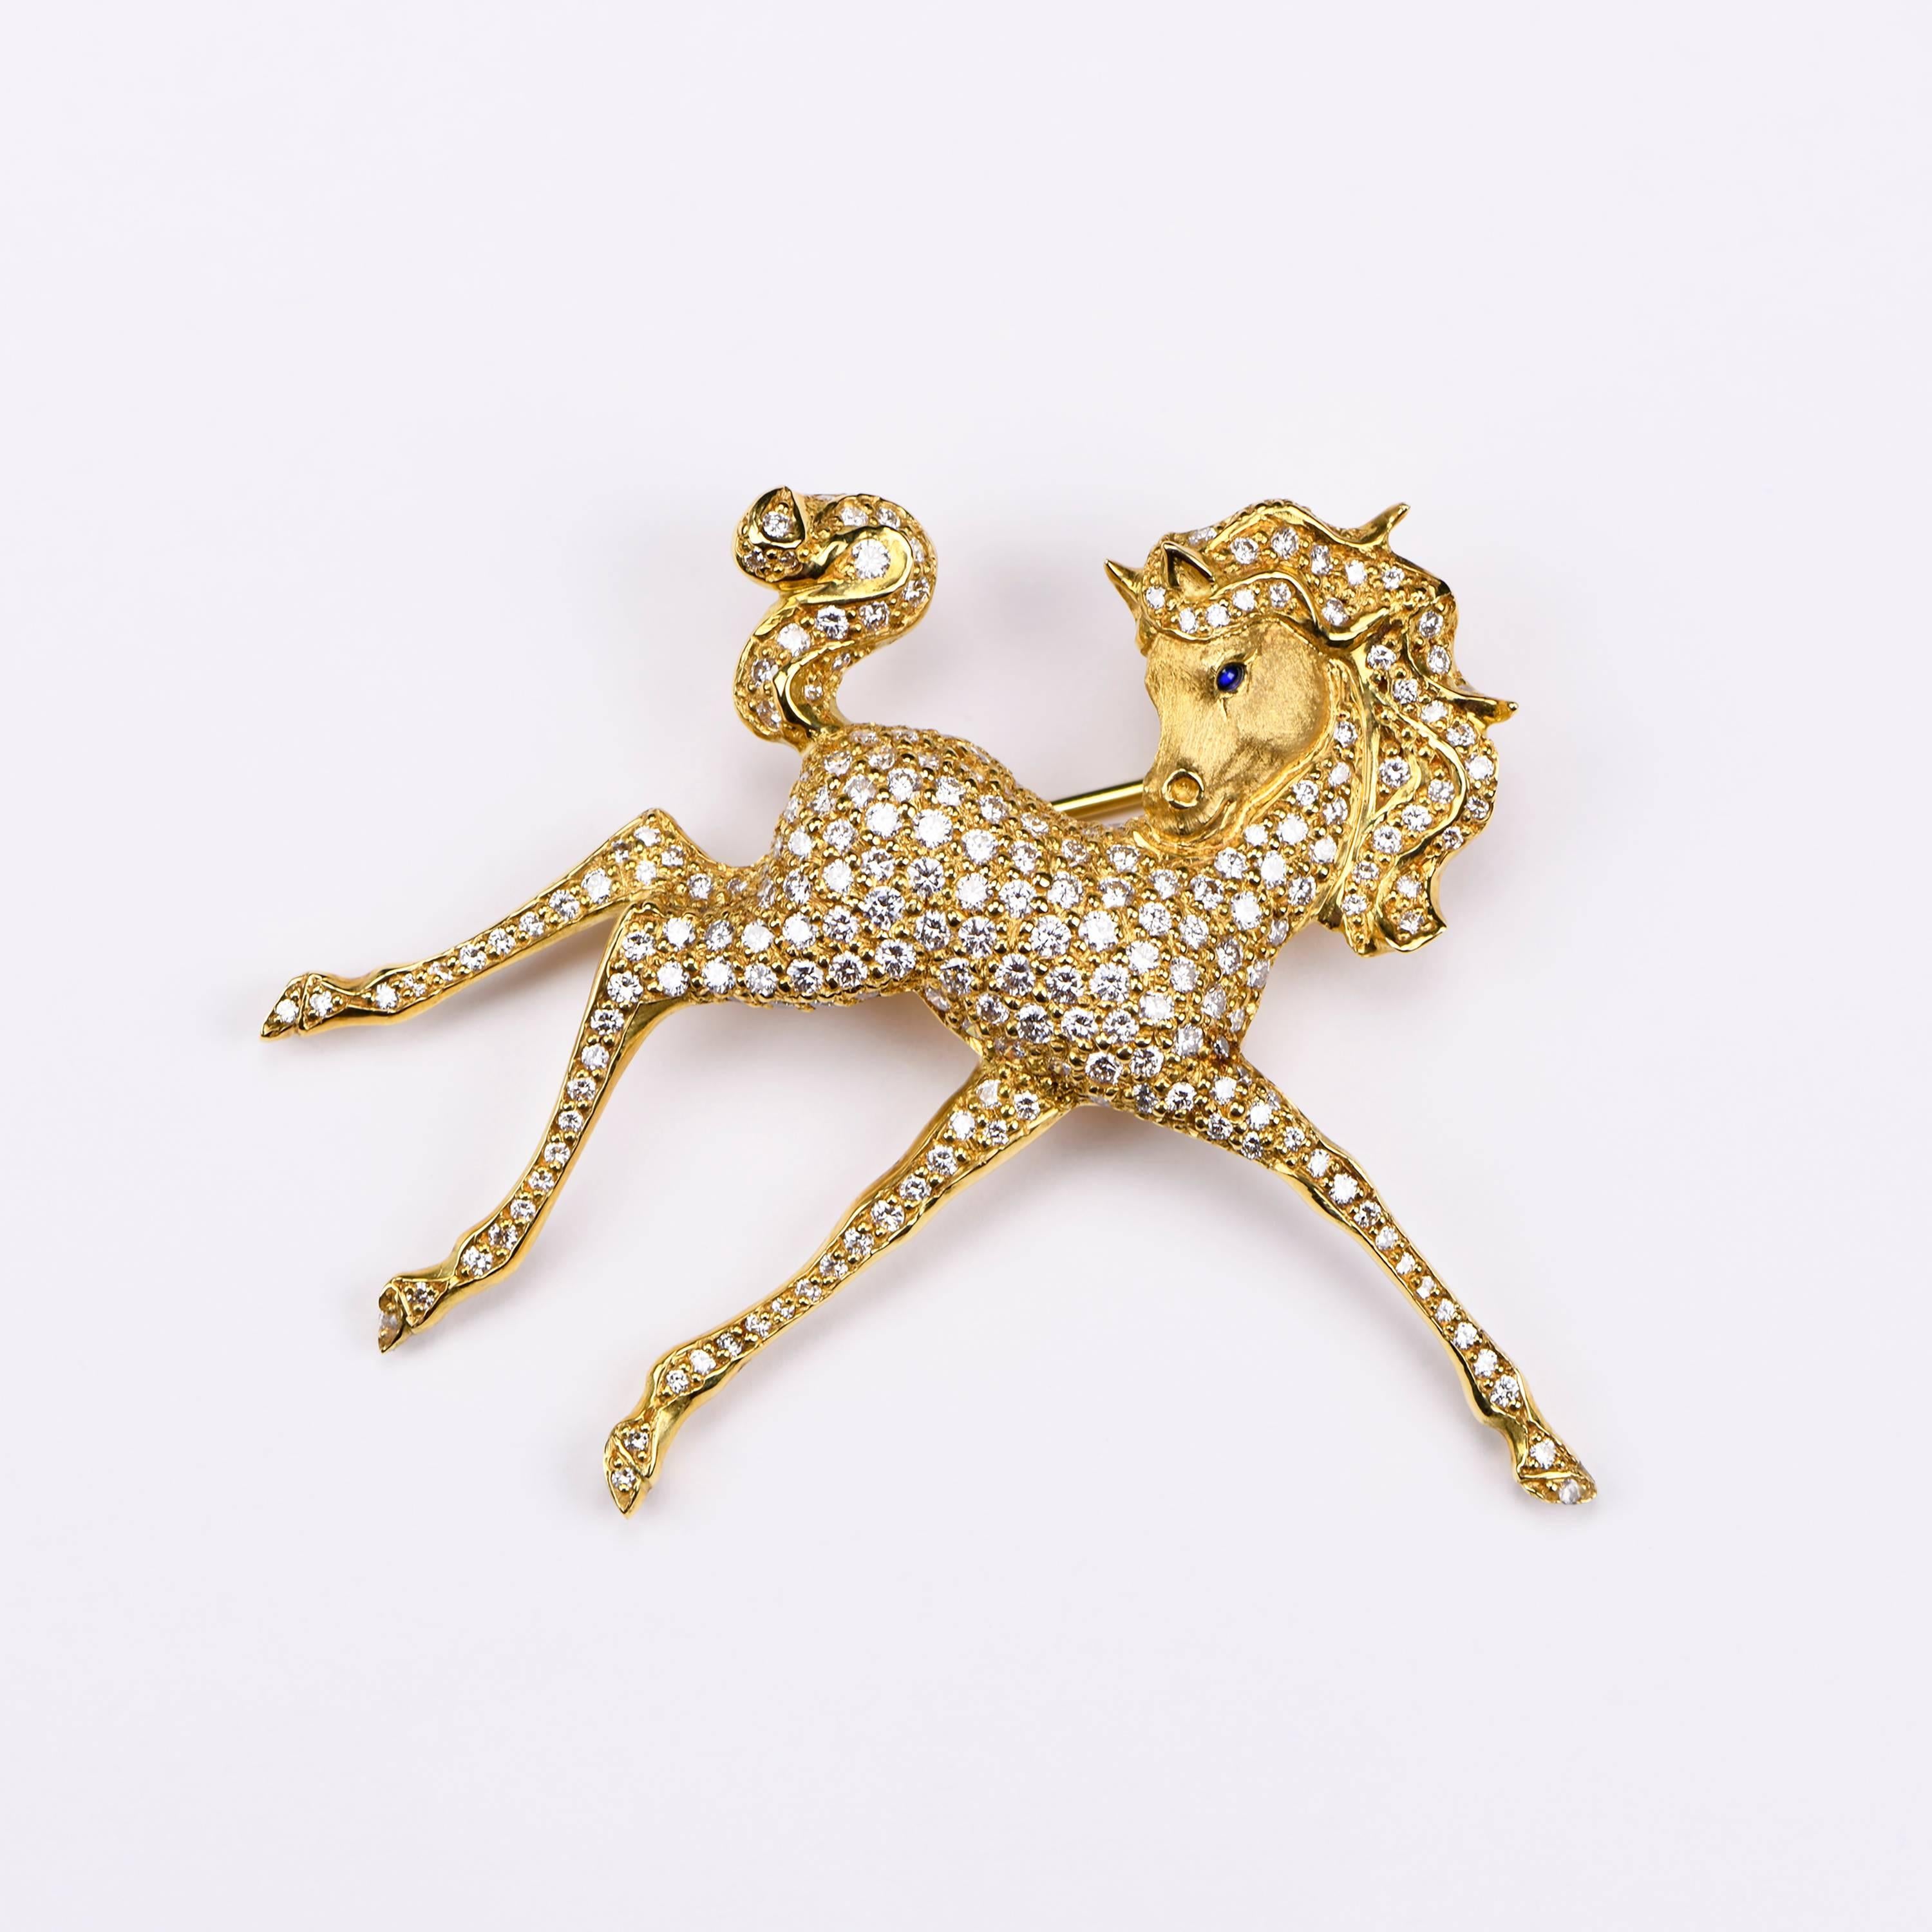 Full of playful charm and eminently precious, this finely sculpted 18ct skipping foal brooch is an exclusive Henn design collaboration with master gemstone carver Alfred Zimmermann who is world-renowned for his superlative nature inspired